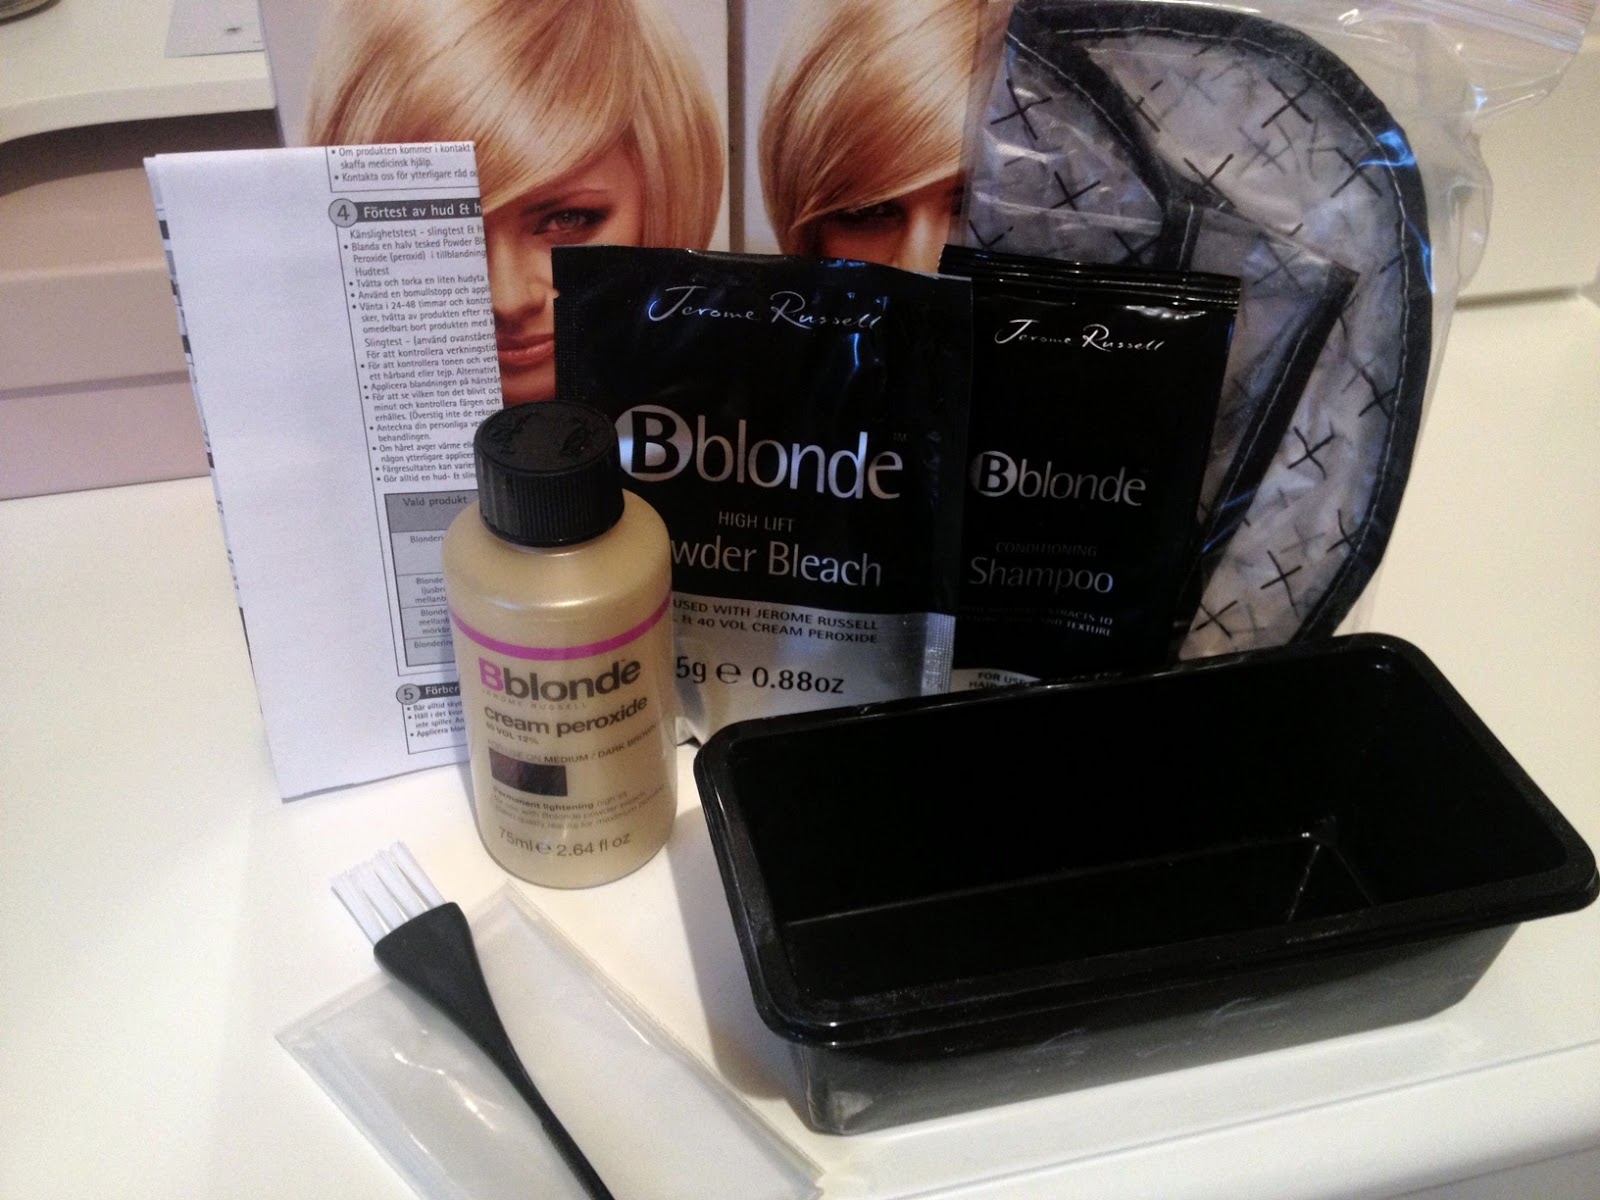 9. Jerome Russell Bblonde Maximum Highlighting Kit in Blue Flash - wide 6